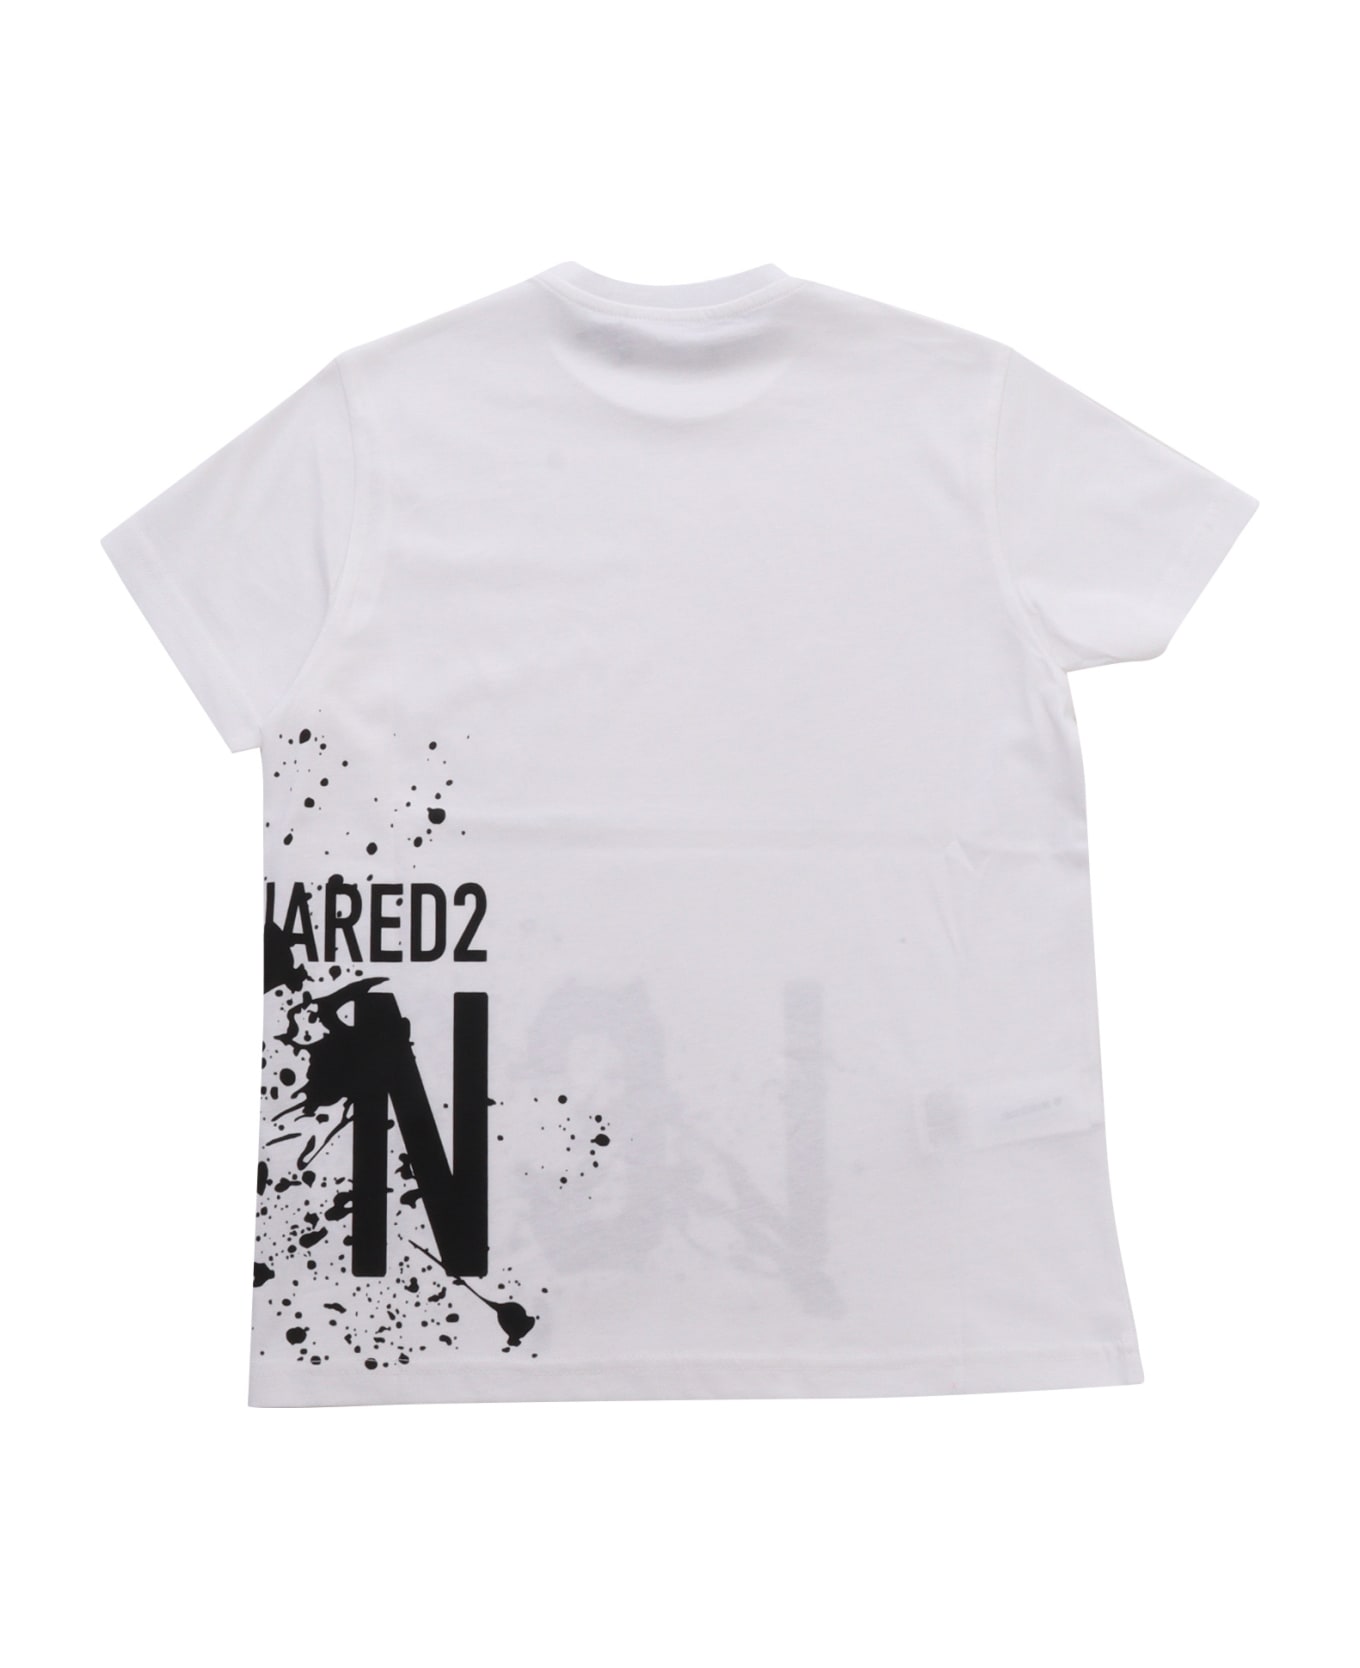 Dsquared2 White T-shirt With Logo - WHITE Tシャツ＆ポロシャツ